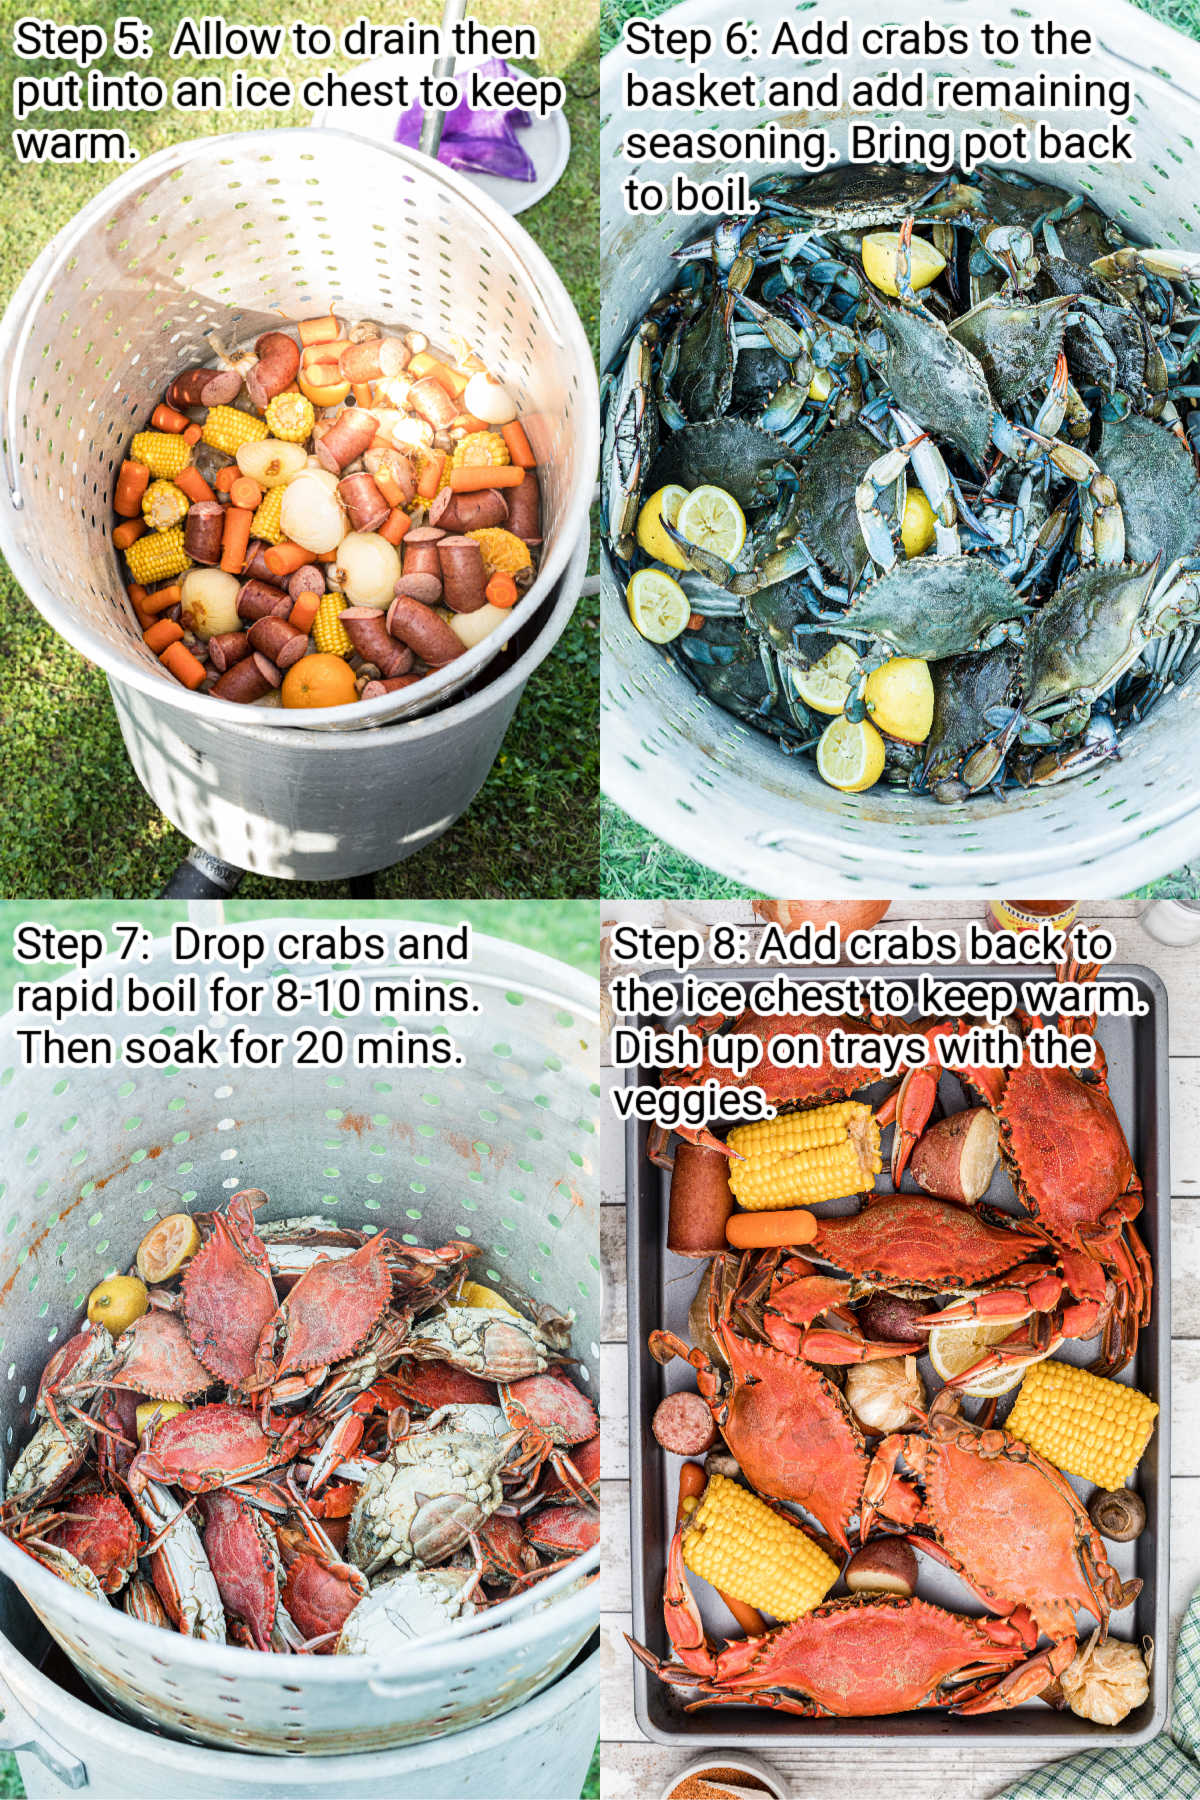 four images showing recipe steps on how to boil cajun crabs